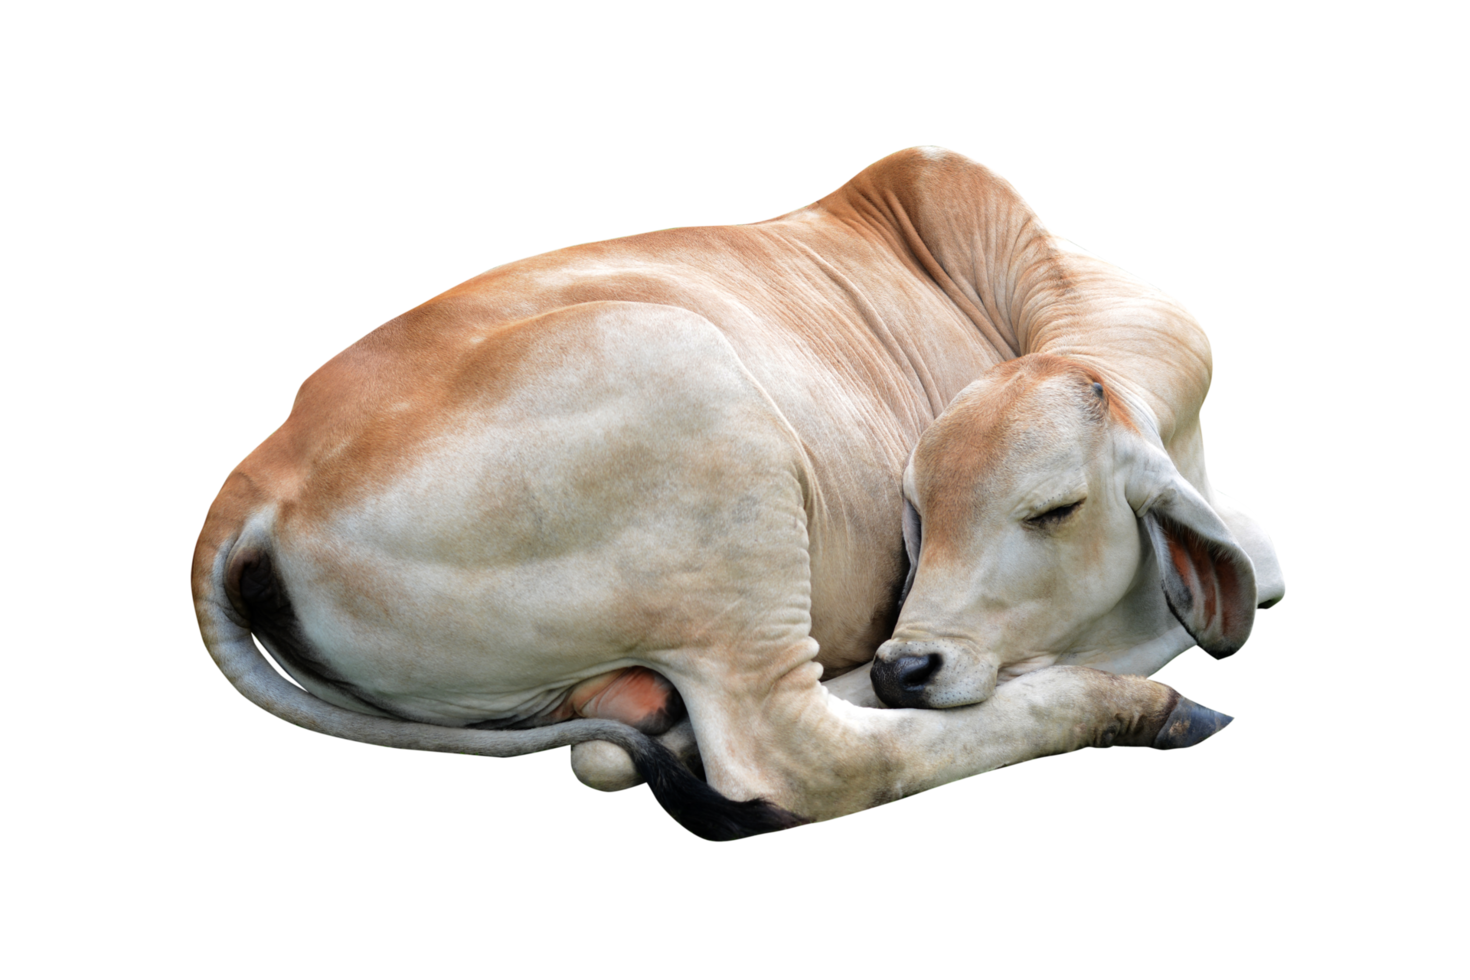 The calf is sleeping happily. png